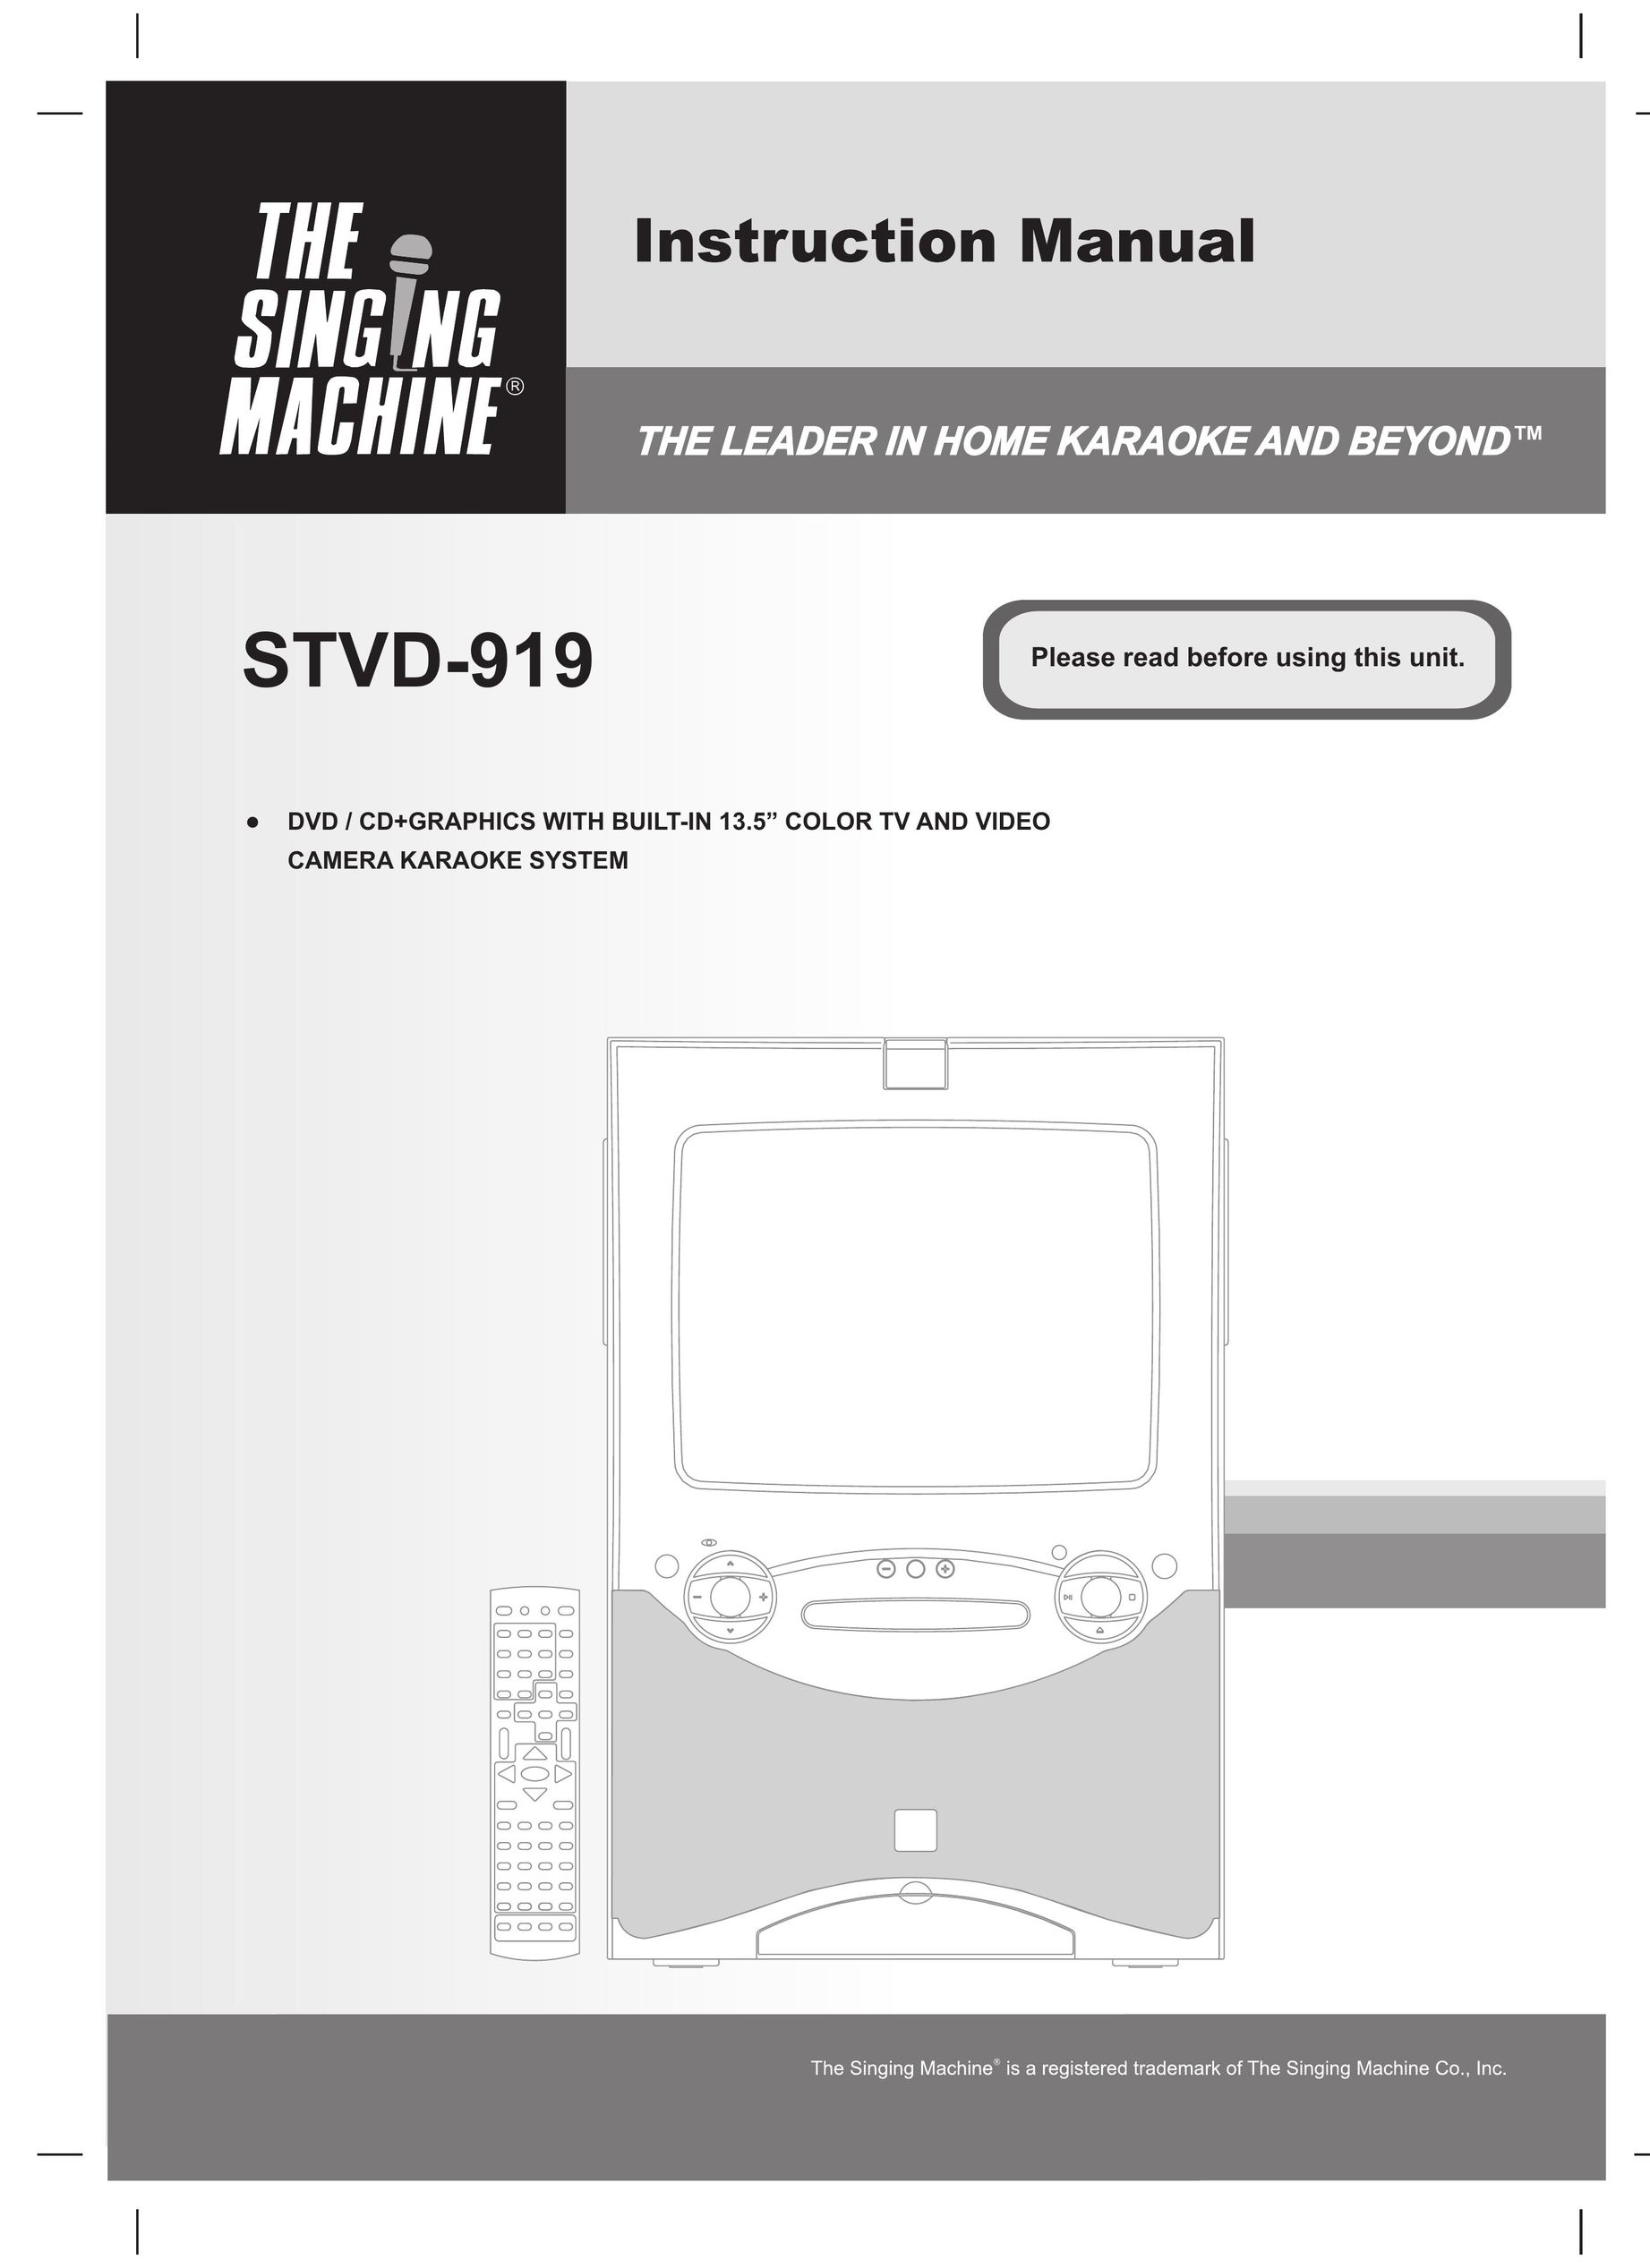 The Singing Machine STVD-919 Home Theater System User Manual